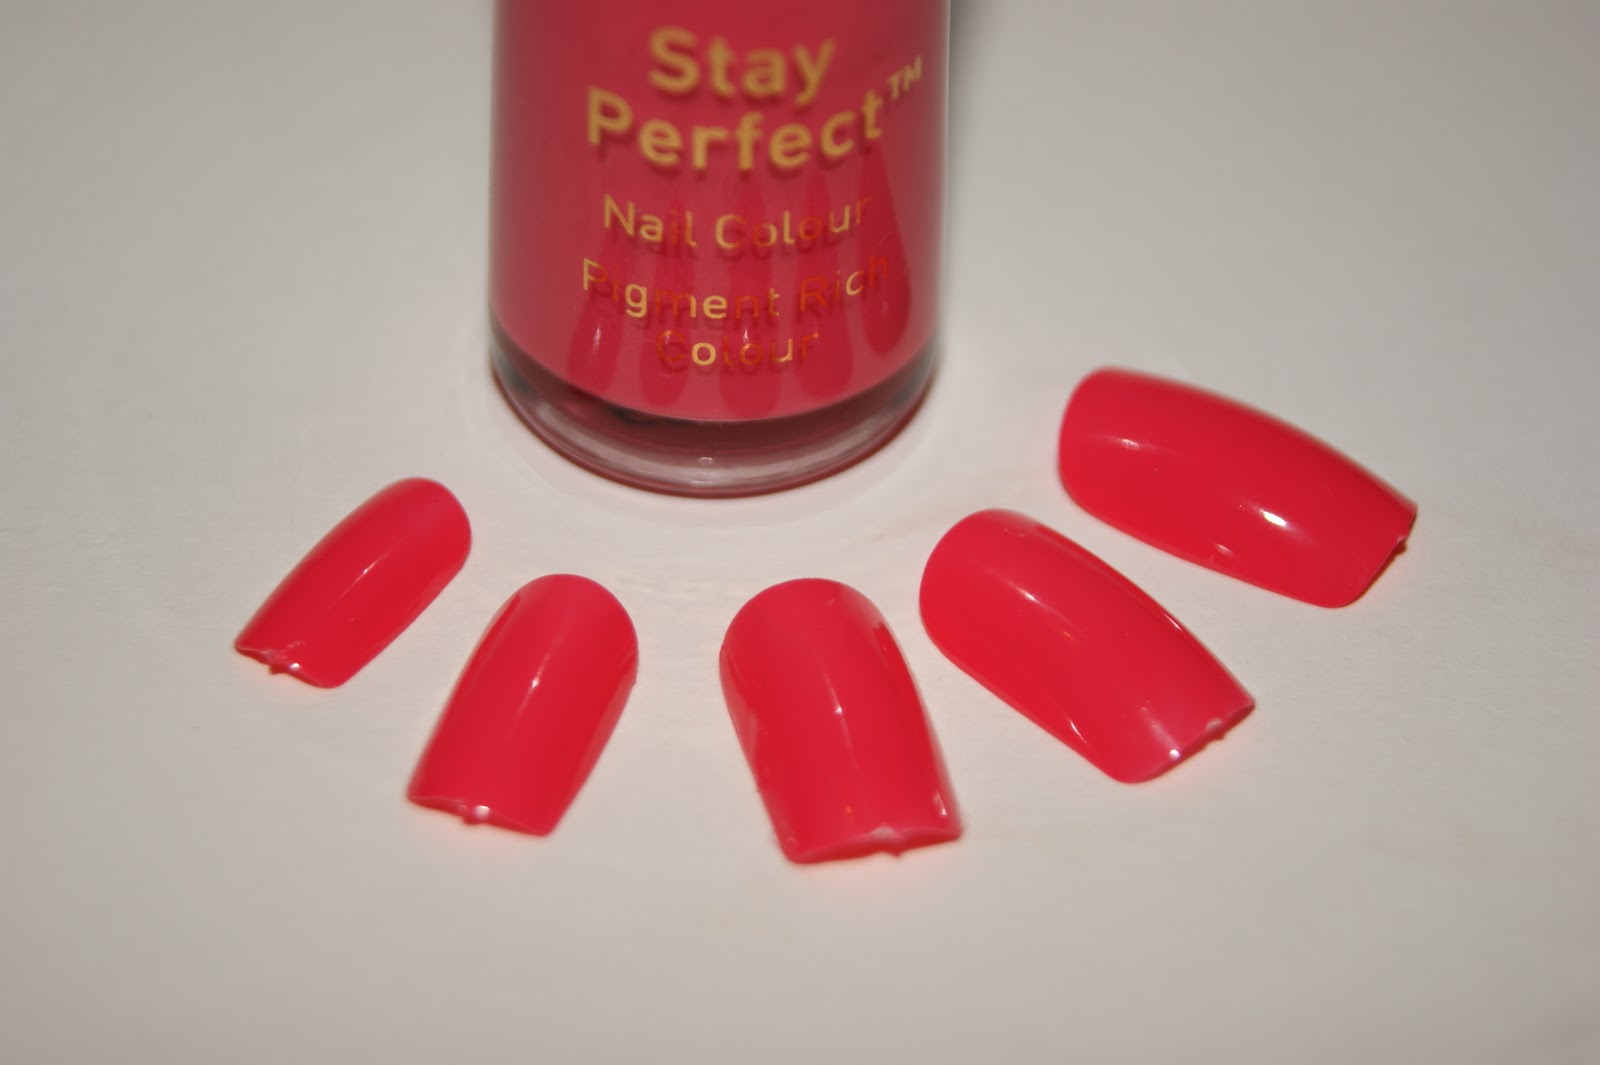  Stay Perfect Nail Colour in Cheeky Chops Review | The Sunday Girl